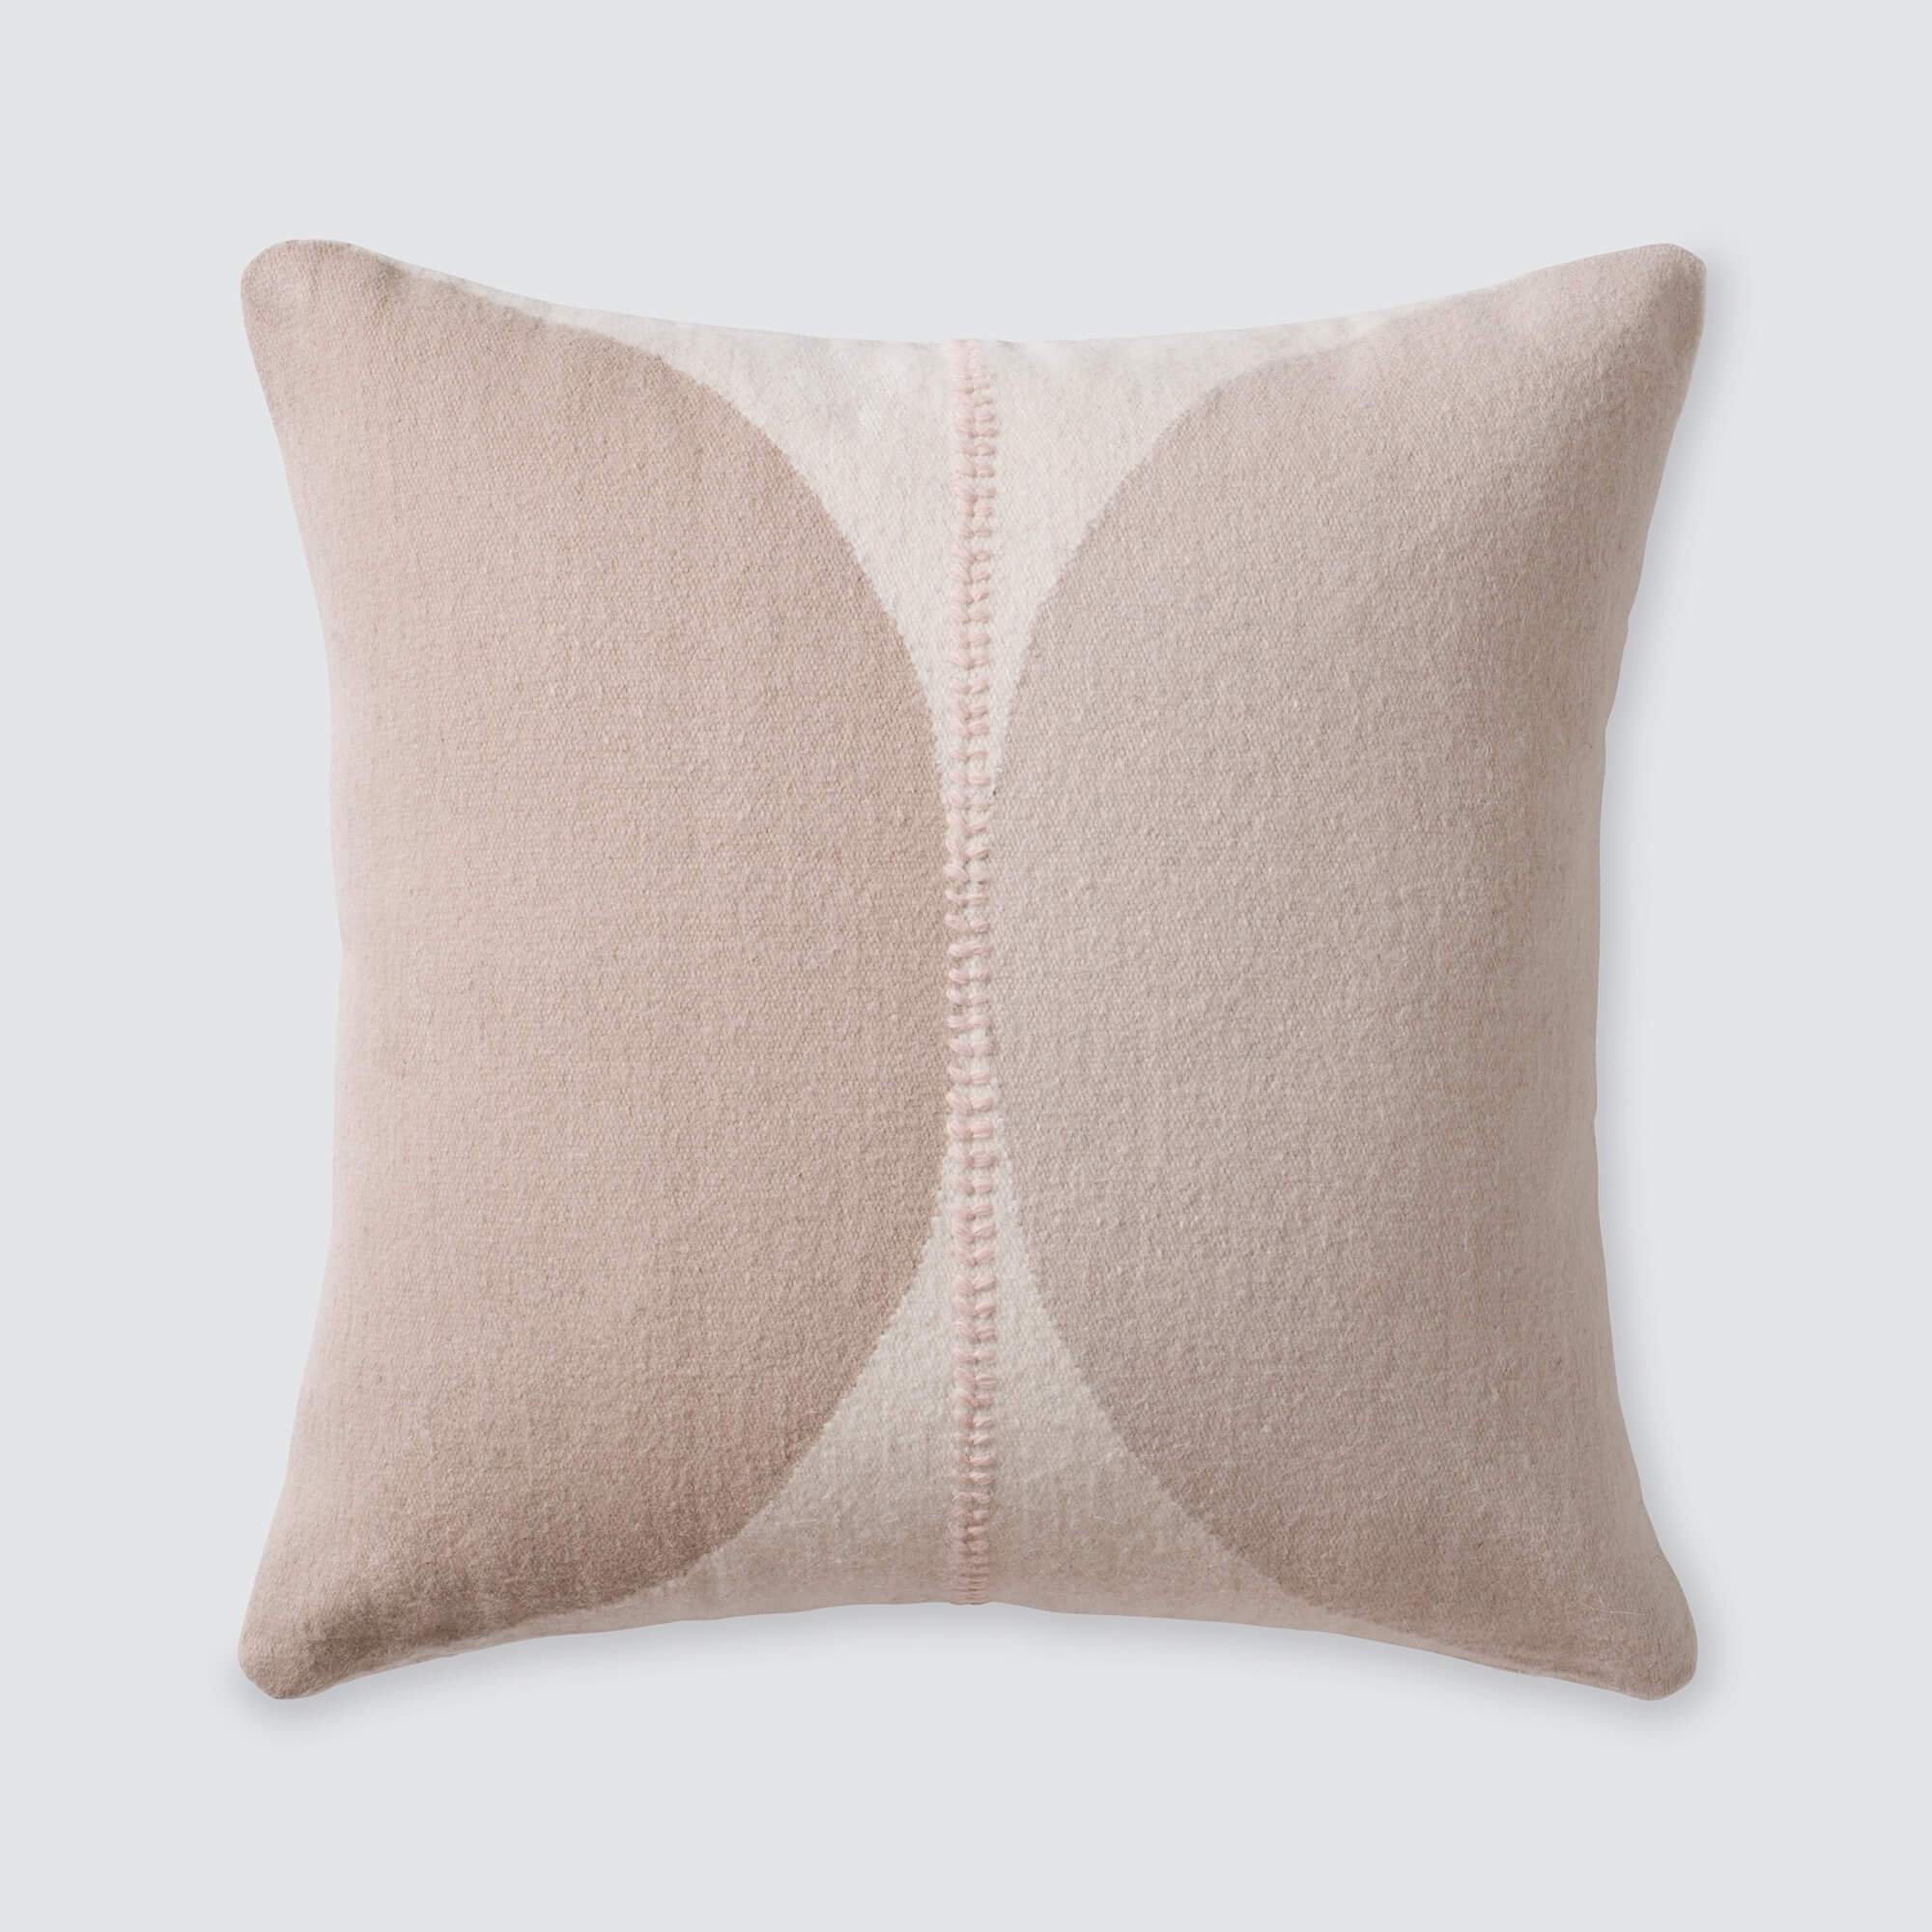 Resol Pillow By The Citizenry - Image 0